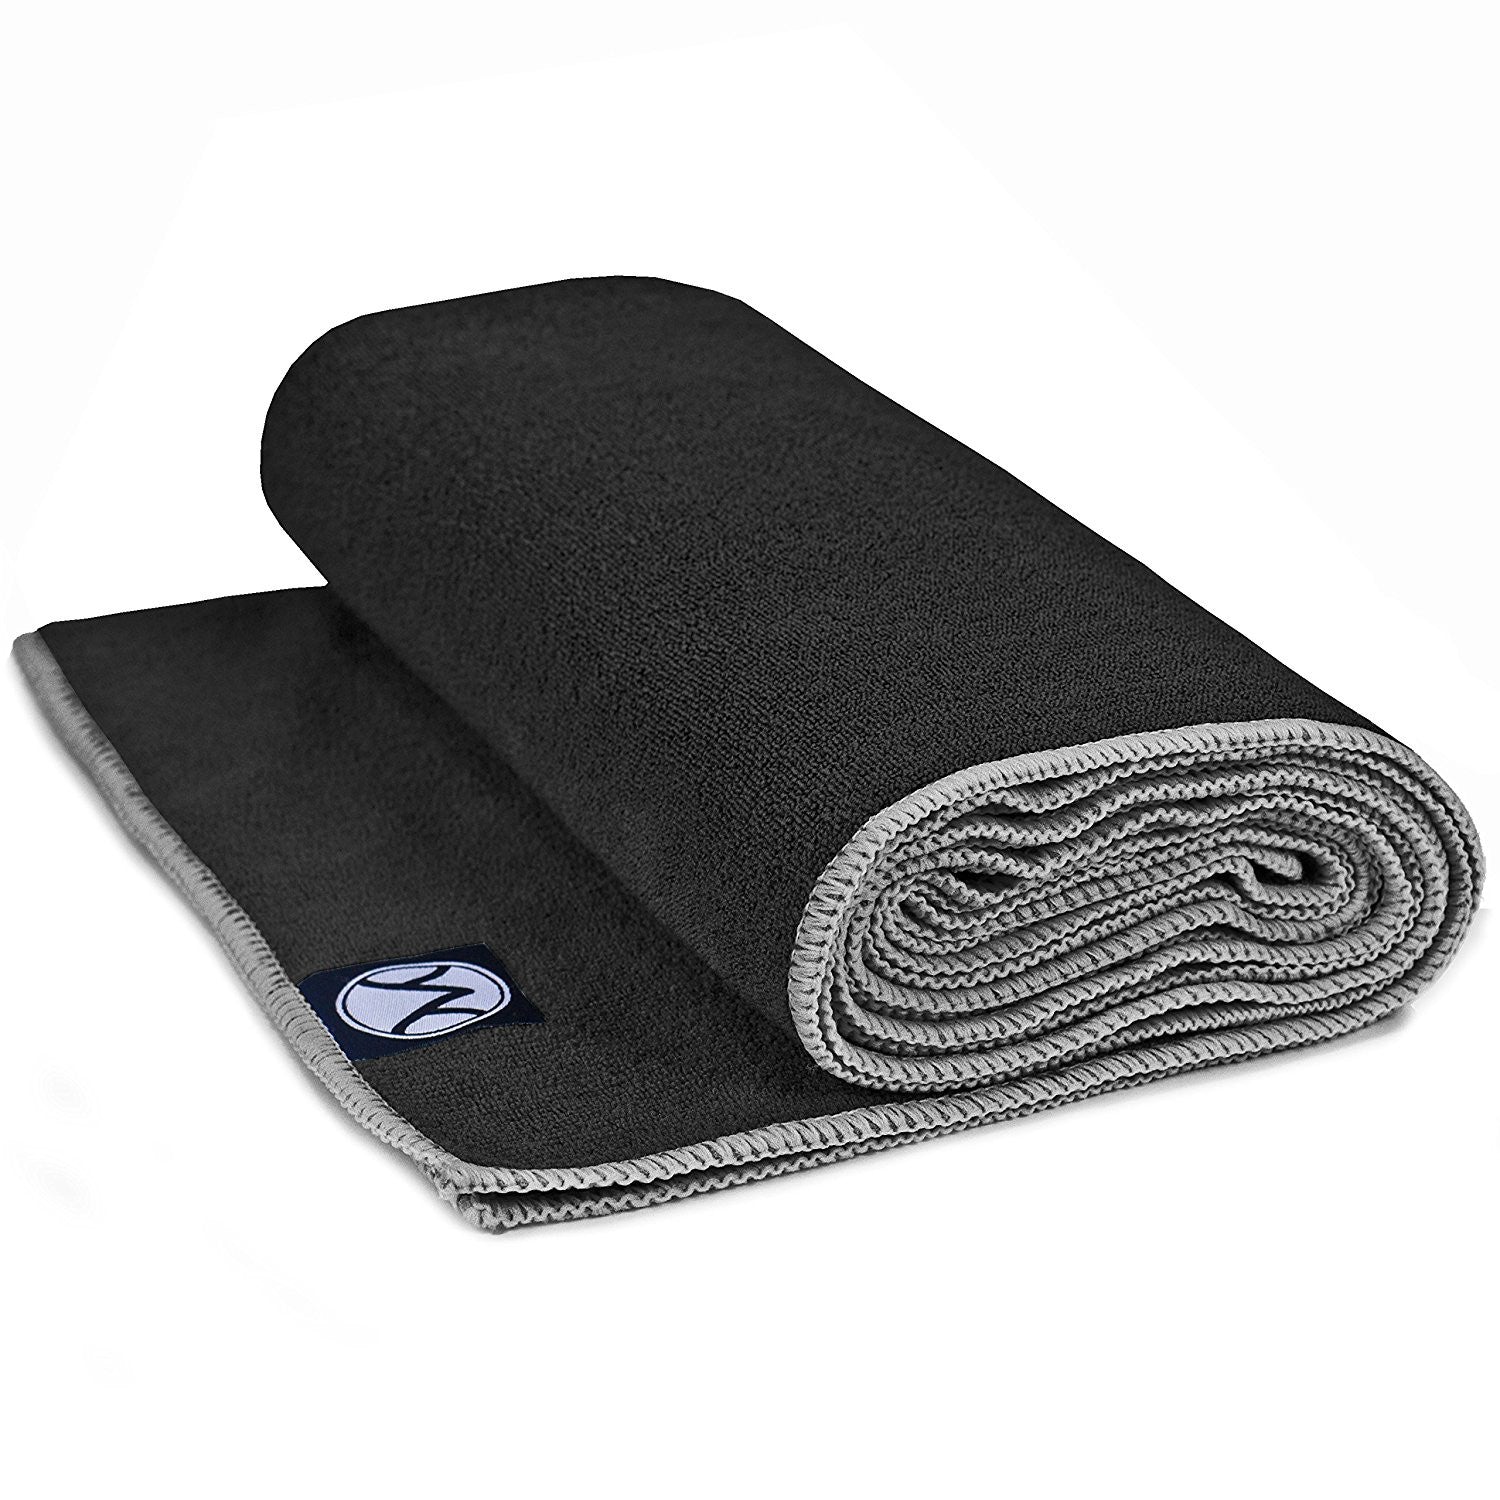 Zuidoost Obsessie Klokje Youphoria Hot Yoga Towel - The perfect addition to your yoga mat.